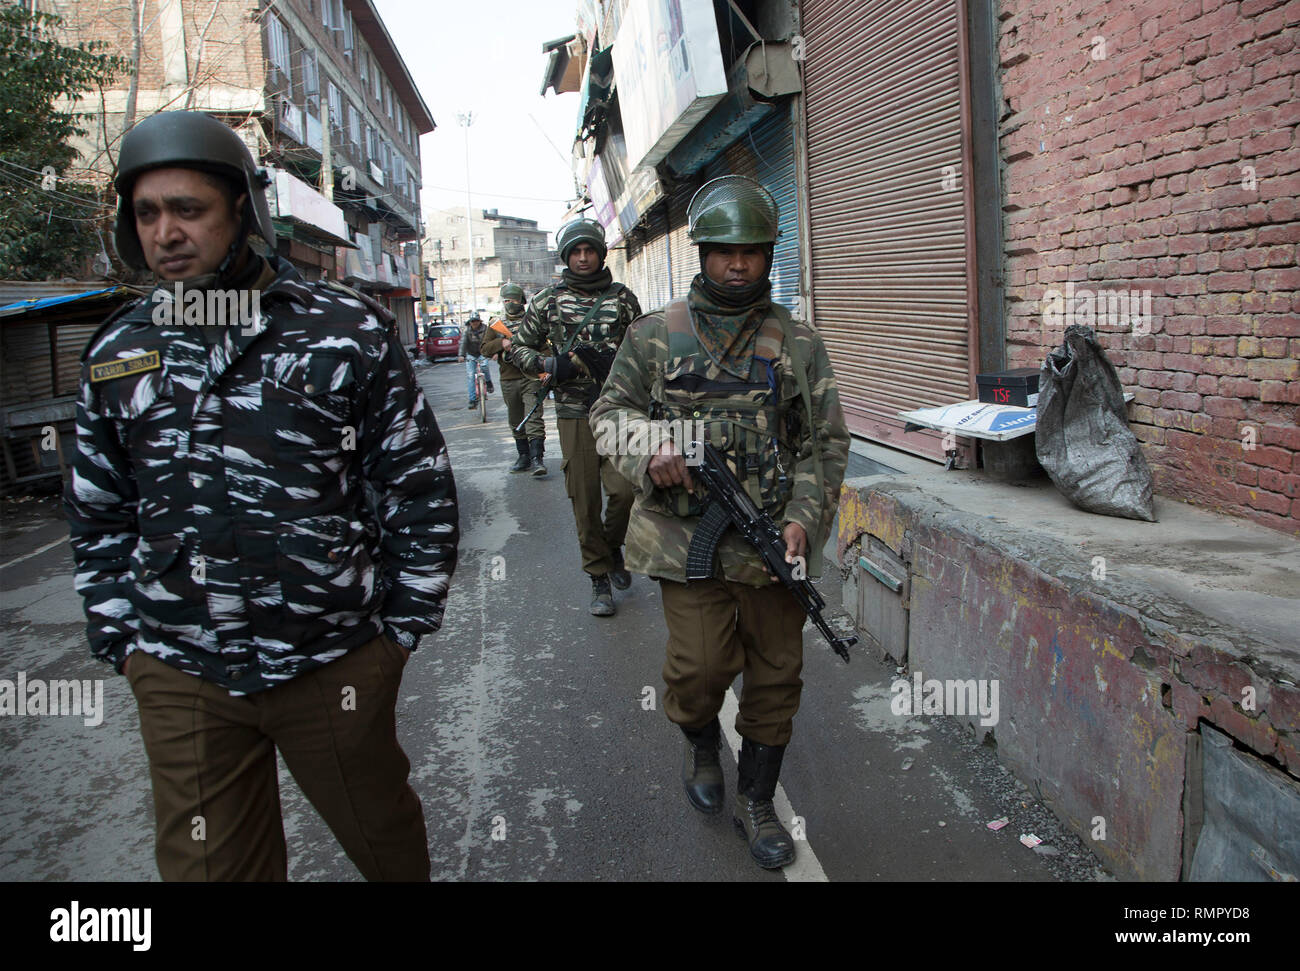 Srinagar, Indian-controlled Kashmir. 16th Feb, 2019. Indian paramilitary troopers patrol at a market place in Srinagar city, the summer capital of Indian-controlled Kashmir, Feb. 16, 2019. Authorities have beefed up security across Indian-controlled Kashmir after a suicide attack targeting paramilitary troopers of Central Reserve Police Force (CRPF) on Thursday killed 40 paramilitary troopers in the restive region, officials said. Credit: Javed Dar/Xinhua/Alamy Live News Stock Photo